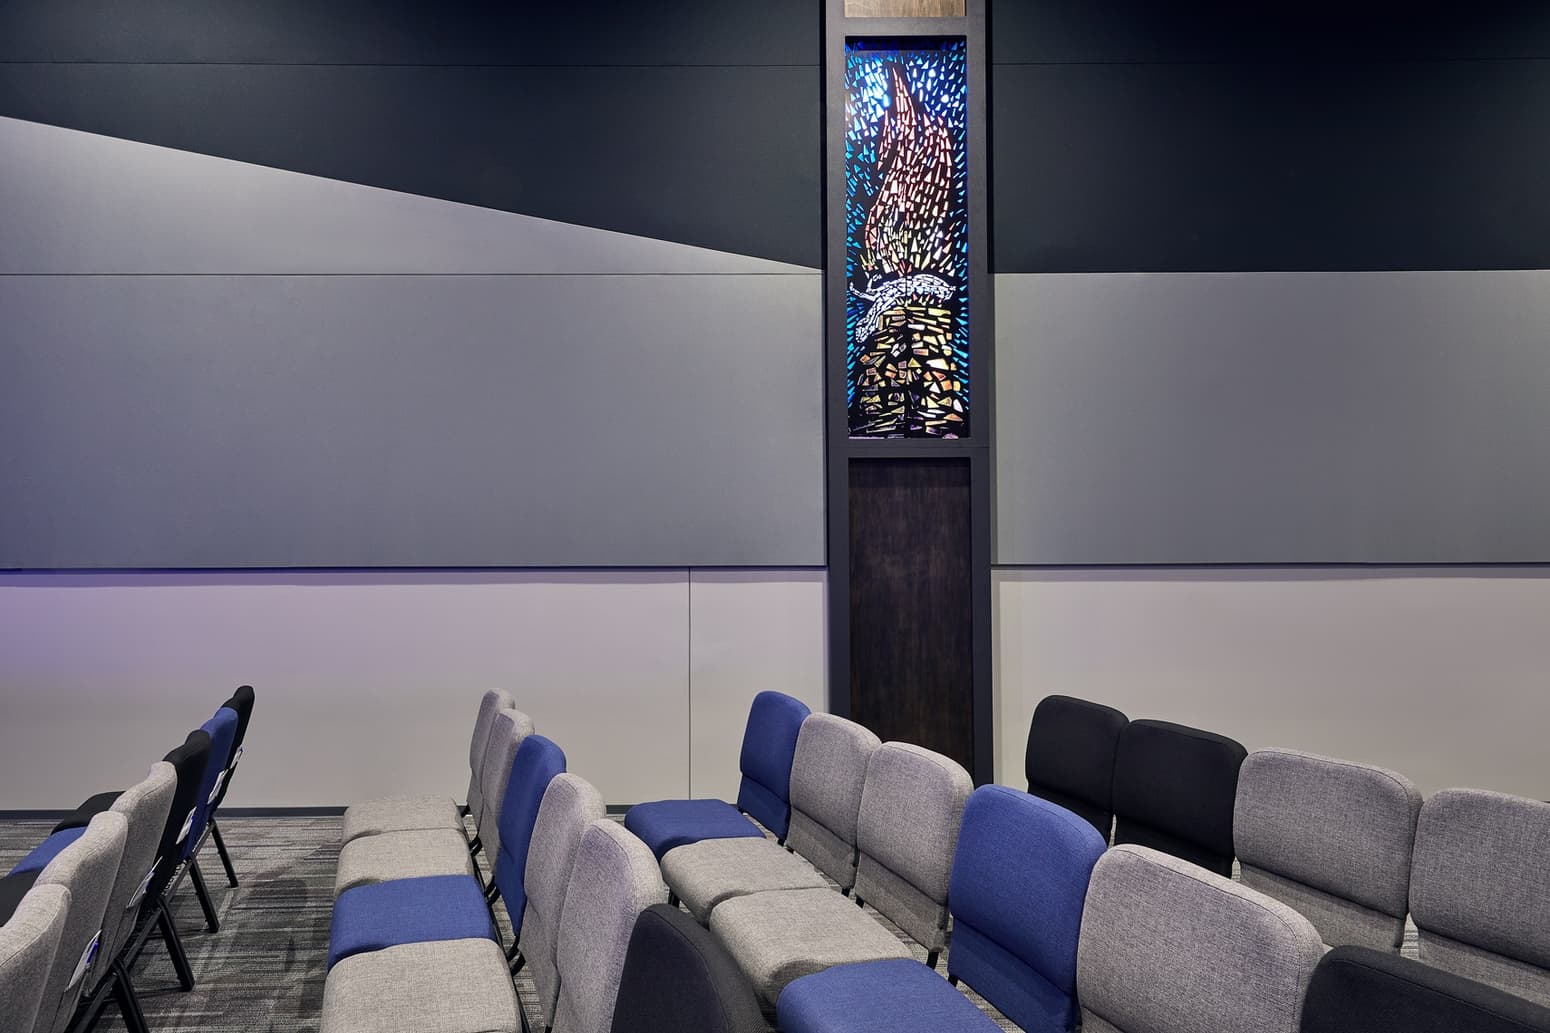 Paragon specializes in acoustic solutions for churches, like these acoustic panels installed for Cross Church.